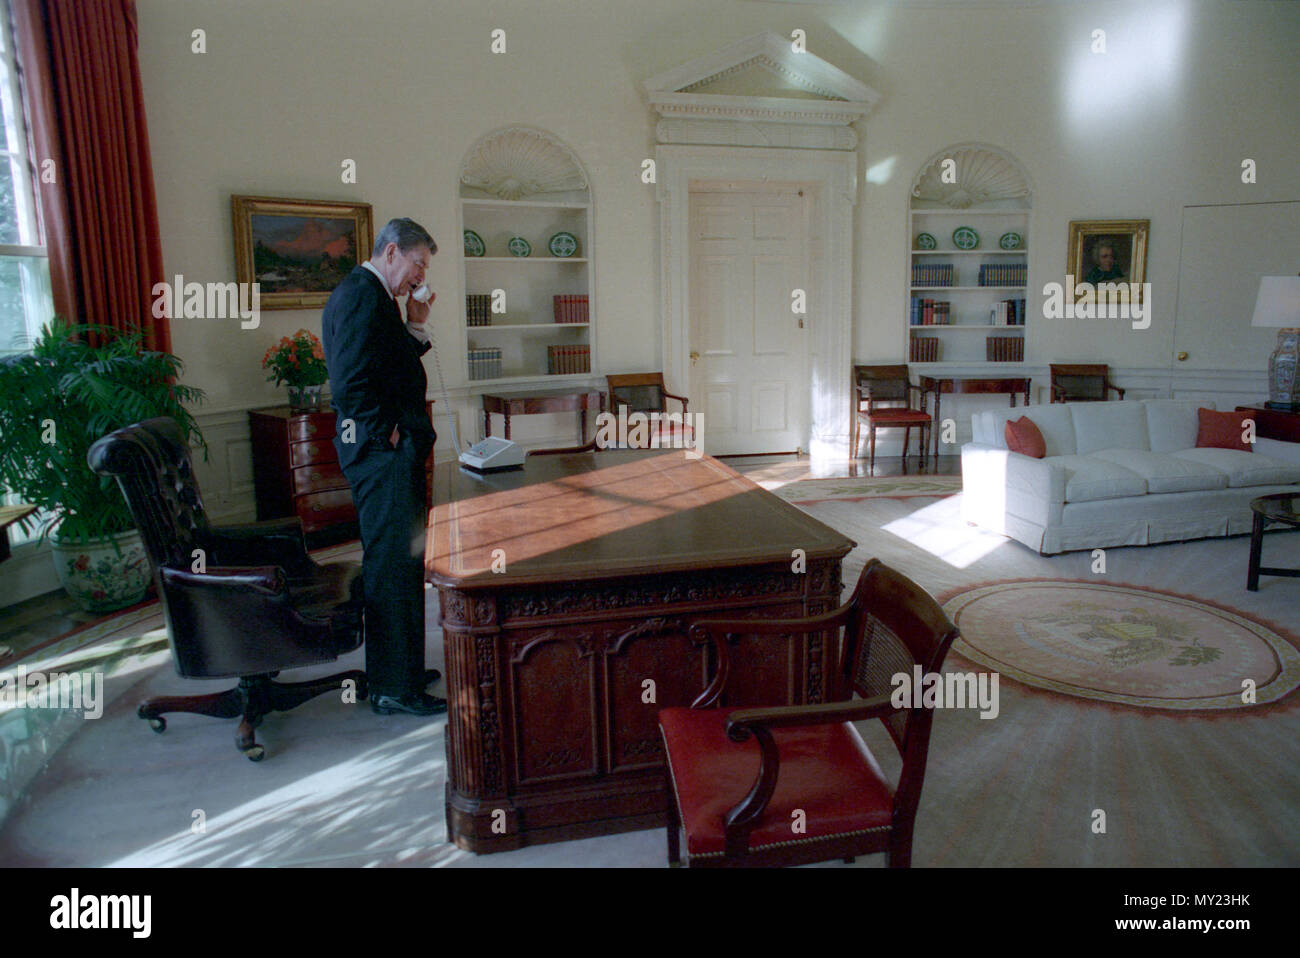 1/20/1989 President Reagan in the Oval Office for the last time Stock Photo